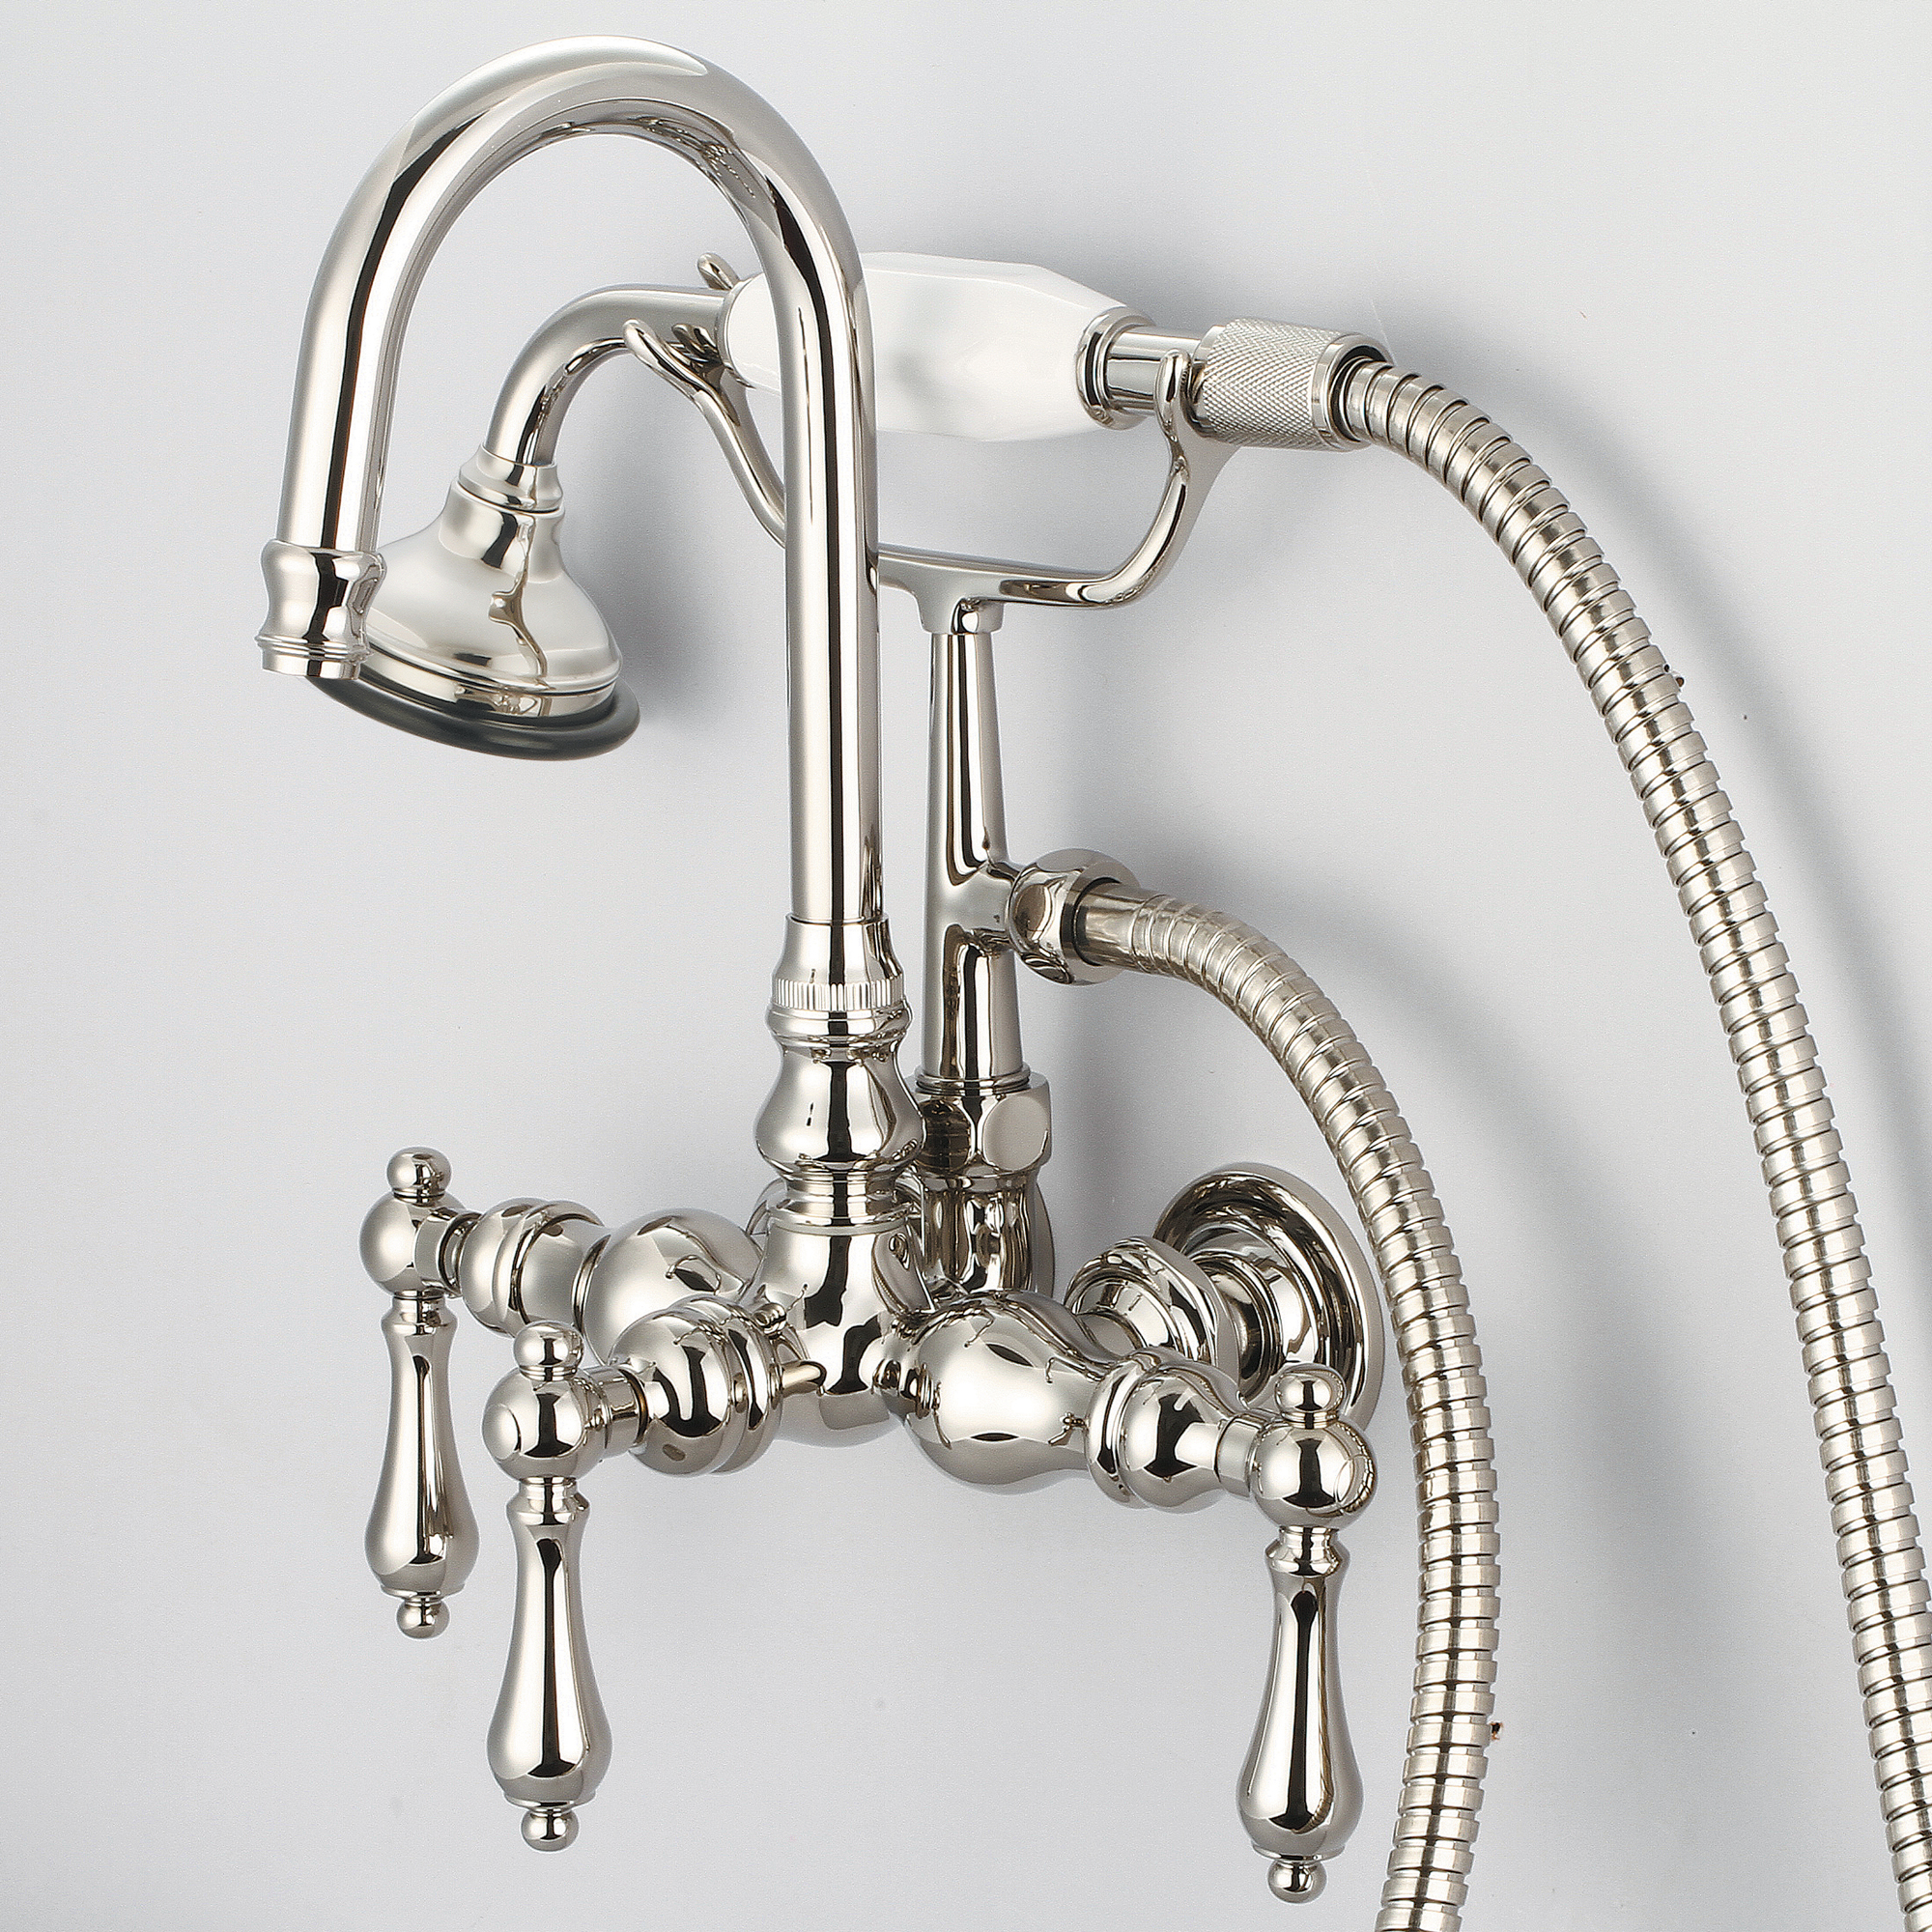 Vintage Classic 3.375 Inch Center Wall Mount Tub Faucet With Gooseneck Spout, Straight Wall Connector & Handheld Shower in Polished Nickel (PVD) Finish With Metal Lever Handles Without Labels